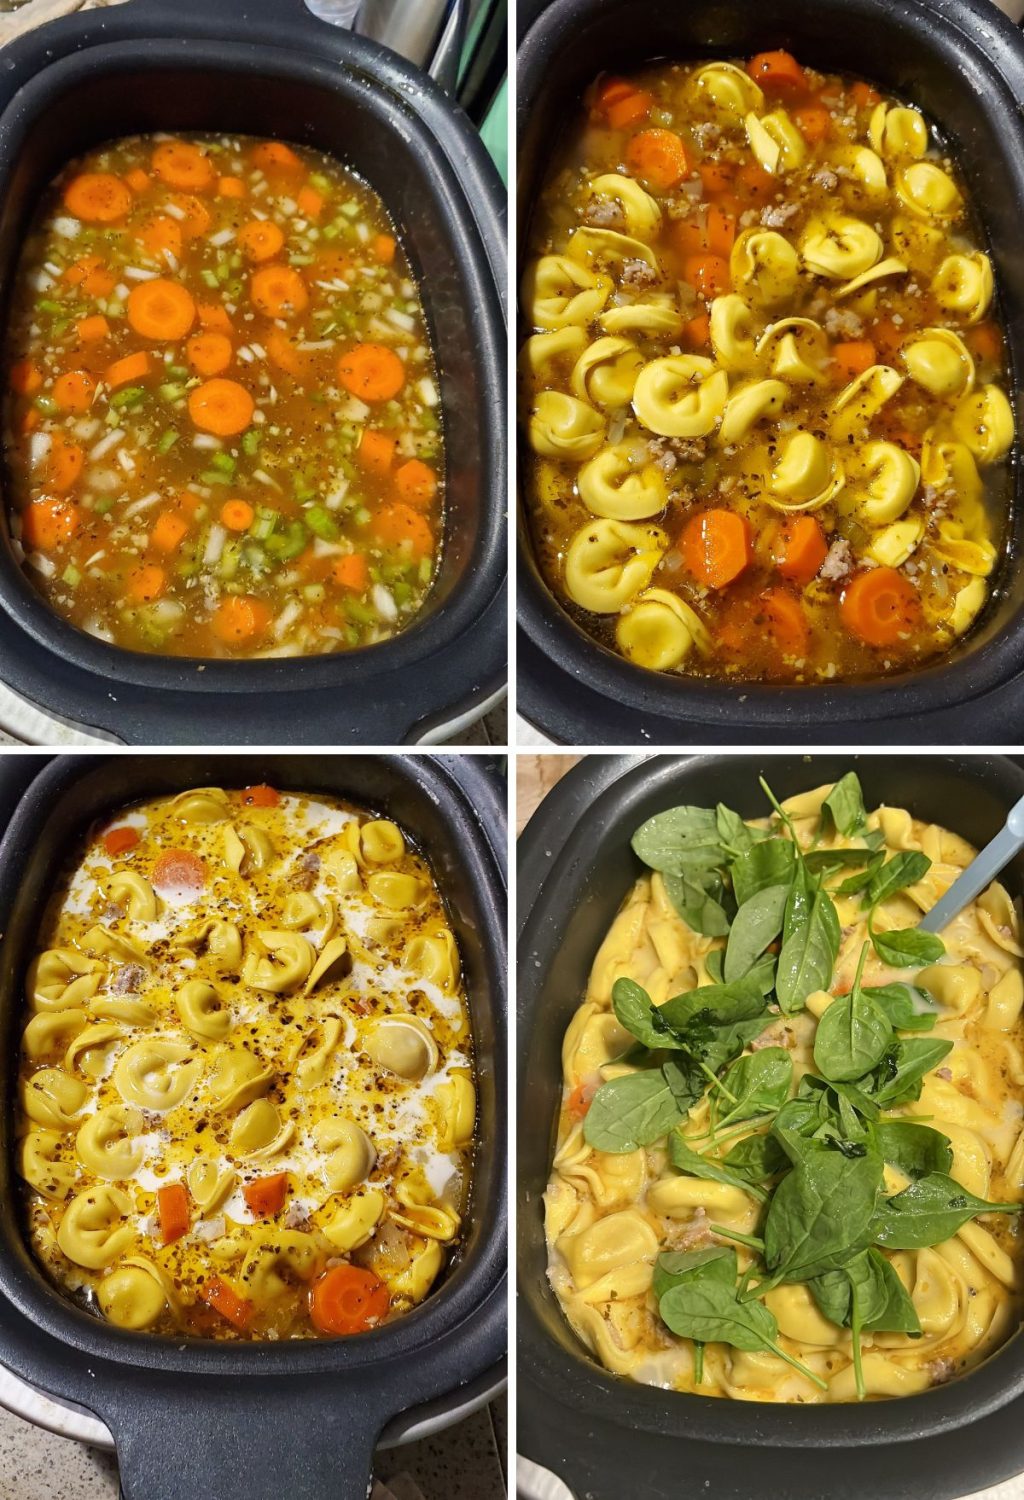 Four pictures showing how to make tortellini soup in a slow cooker.